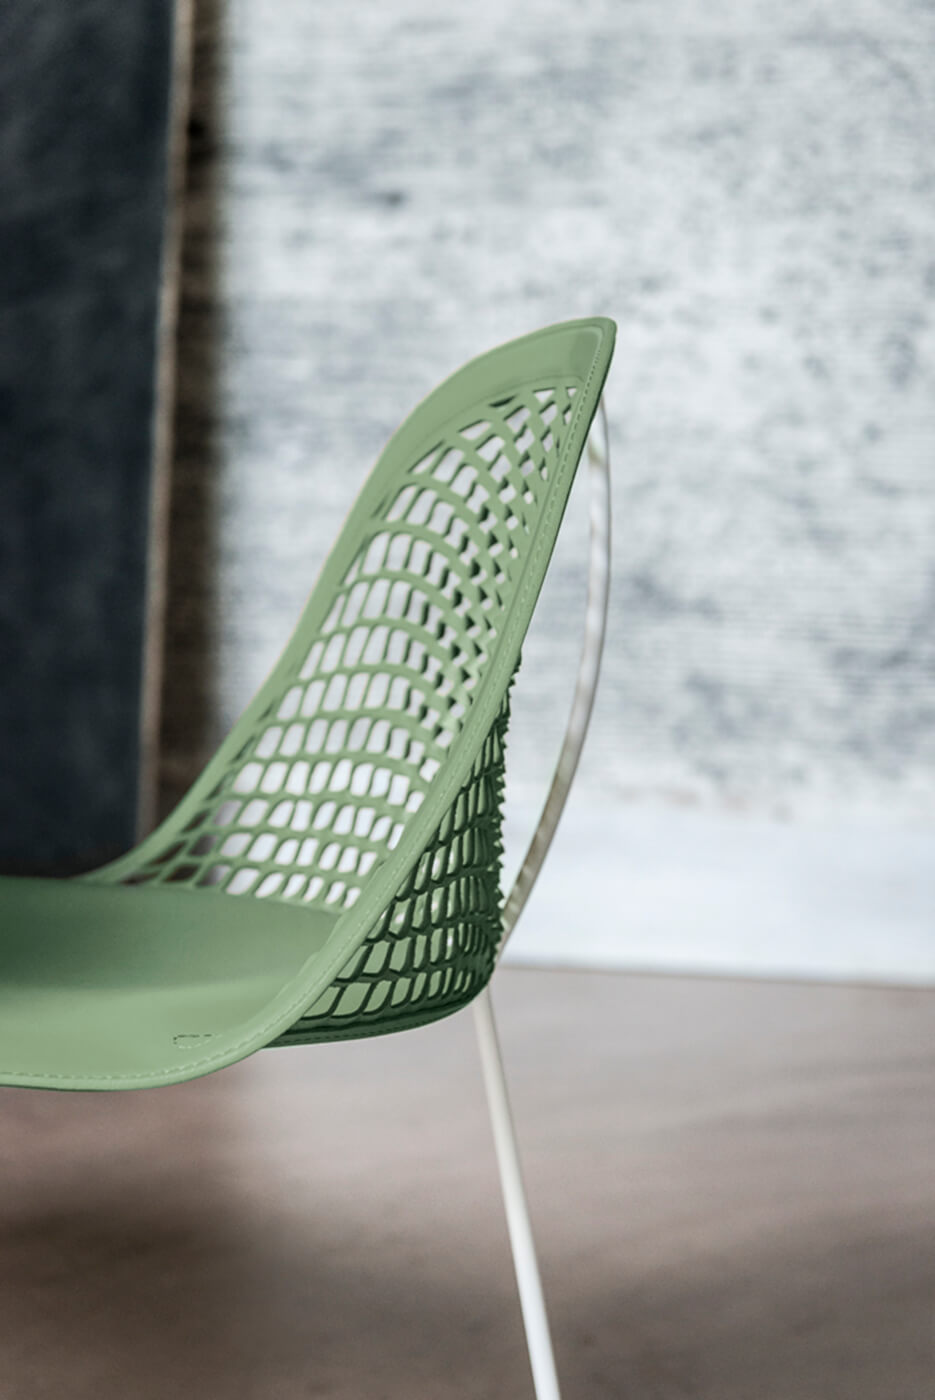 Guapa chair detail with green leather seat and metal structure